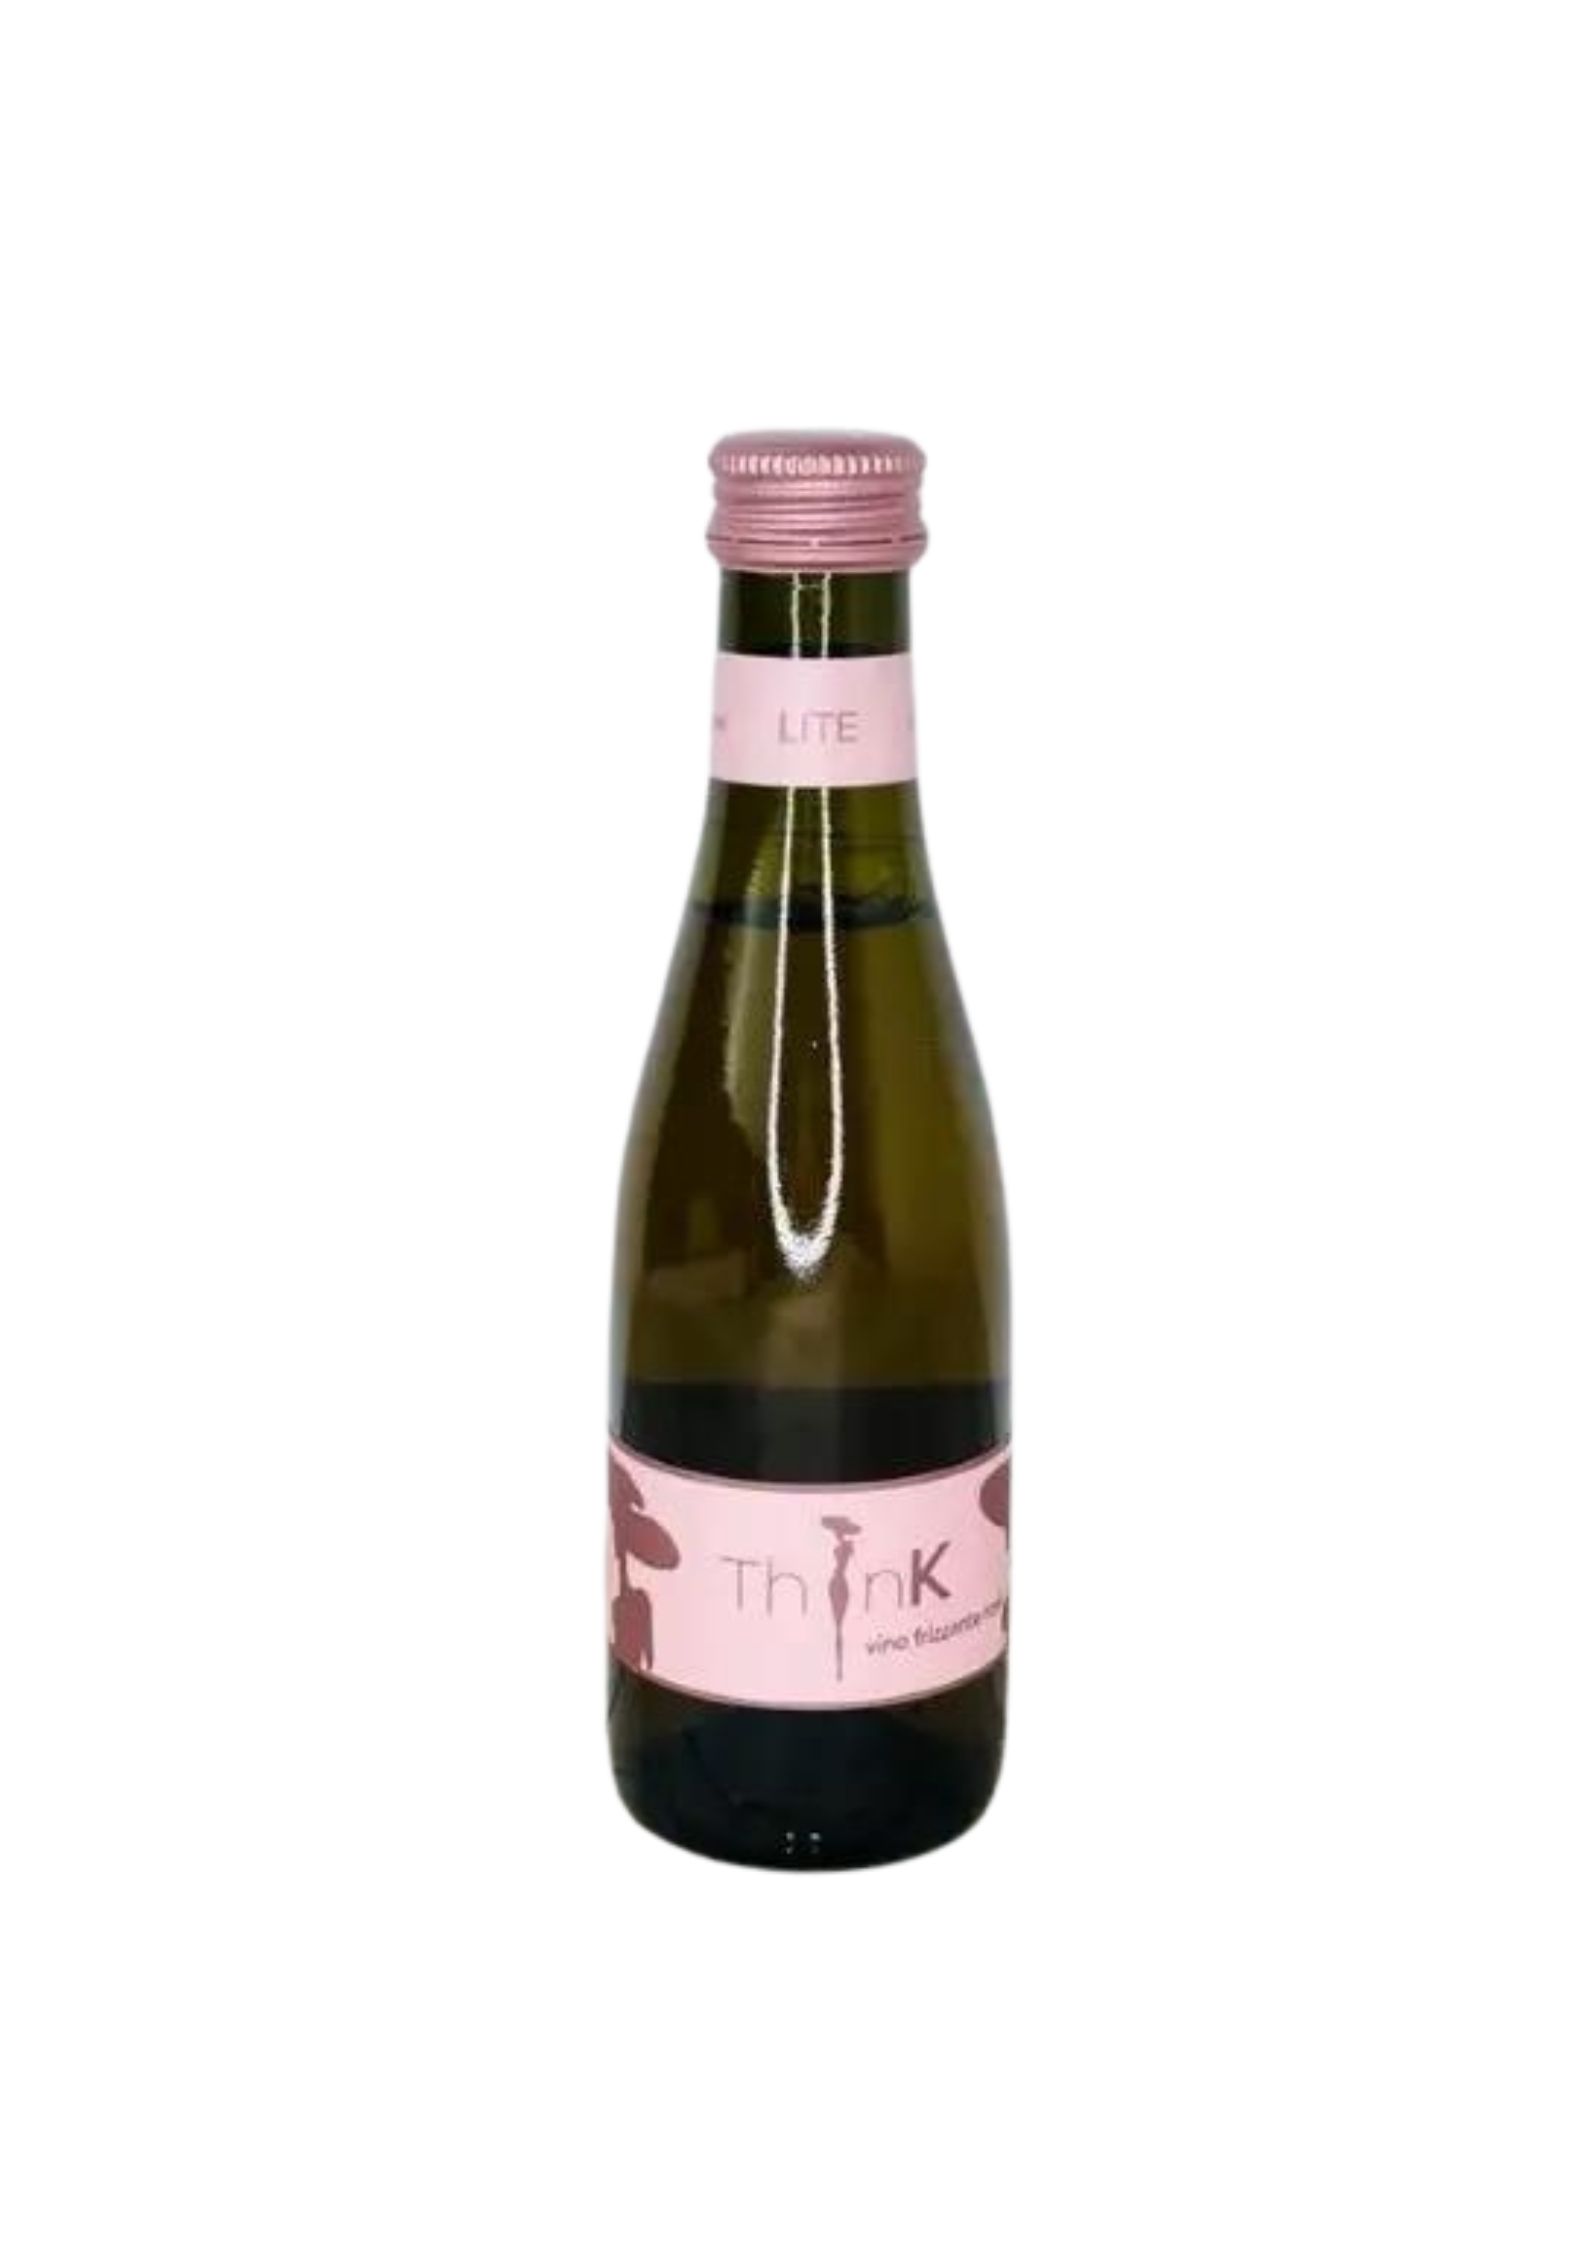 <h2>Miniature Bottle of Organic and Vegan Pinot Grigio</h2>
<br>
<ul>
<li>200ml Bottle of ThinK Pink Pinot Grigio Sparkling Rosé - 11%</li>
<li>Calories: 124kcal per bottle</li>
<li>Attach your own personal message</li>
<li>This product contains alcohol and as such should only be bought for someone over the age of 18</li>
<li>For delivery area coverage see below</li>
</ul>
<br>
<h2>Gift Delivery Coverage</h2>
<p>Our shop delivers flowers and gifts to the following Liverpool postcodes L1 L2 L3 L4 L5 L6 L7 L8 L11 L12 L13 L14 L15 L16 L17 L18 L19 L24 L25 L26 L27 L36 L70 If your order is for an area outside of these we can organise delivery for you through our network of florists. We will ask them to make as close as possible to the image but because of the difference in stock and sundry items, it may not be exact.</p>
<br>
<h2>Alcohol Gifts</h2>
<p>As a licensed florist, we are able to supply alcoholic drinks either as a gift on their own or with flowers. We have carefully selected a range that we know you will love either as a gift in itself or to provide that extra bit of celebratory luxury to a floral gift.</p>
<p>Add a fashionable tipple to the celebratory mood with this Organic and Vegan Miniature Sparkling Rosé. </p>
<p>ThinK Pink is a Pinot Grigio Sparkling Rosé. It is a vegan wine and organic with reduced sugar and a reduction in calories. ThinK Pink is made from the finest Pinot Grigio grapes from the heart of Treviso, north-east Italy. ThinK Pink have developed a Pinot Grigio Sparkling Rosé that is fresh, satisfying, luxurious and tastes ‘just that little bit better’.</p>
<p>This is a lovely addition to your bouquet of flowers to celebrate a special occasion.</p>
<p><strong>THIS ITEM WILL NEED TO ACCOMPANY A FLOWER ORDER OR BE A COMBINATION OF EXTRA ITEMS TO REACH OUR MINIMUM ORDER OF £35</strong></p>
<br>
<h2>Online Gift Ordering | Online Gift Delivery</h2>
<p>Through this website you can order 24 hours, Booker Gifts and Gifts Liverpool have put together this carefully selected range of Flowers, Gifts and Finishing Touches to make Gift ordering as easy as possible. This means even if you do not live in Liverpool we make it easy for you to see what you are getting when buying for delivery in Liverpool.</p>
<br>
<h2>Liverpool Flower and Gift Delivery</h2>
<p>We are open 7 days a week and offer advanced booking flower delivery, same-day flower delivery, Guaranteed AM Flower Delivery and also offer Sunday Flower Delivery.</p>
<p>Our florists Deliver in Liverpool and can provide flowers for you in Liverpool, Merseyside. And through our network of florists can organise flower deliveries for you nationwide.</p>
<br>
<h2>Beautiful Gifts Delivered | Best Florist in Liverpool</h2>
<p>Having been nominated the Best Florist in Liverpool by the independent Three Best Rated for the 5th year running you can feel secure with us</p>
<p>You can trust Booker Gifts and Gifts to deliver the very best for you.</p>
<br>
<h2>5 Star Google Review</h2>
<p><em>So Pleased with the product and service received. I am working away currently, so ordered online, and after my own misunderstanding with online payment, I contacted the florist directly to query. Gemma was very prompt and helpful, and my flowers were arranged easily. They arrived this morning and were as impactful as the pictures on the website, and the quality of the flowers and the arrangement were excellent. Great Work! David Welsh</em></p>
<br>